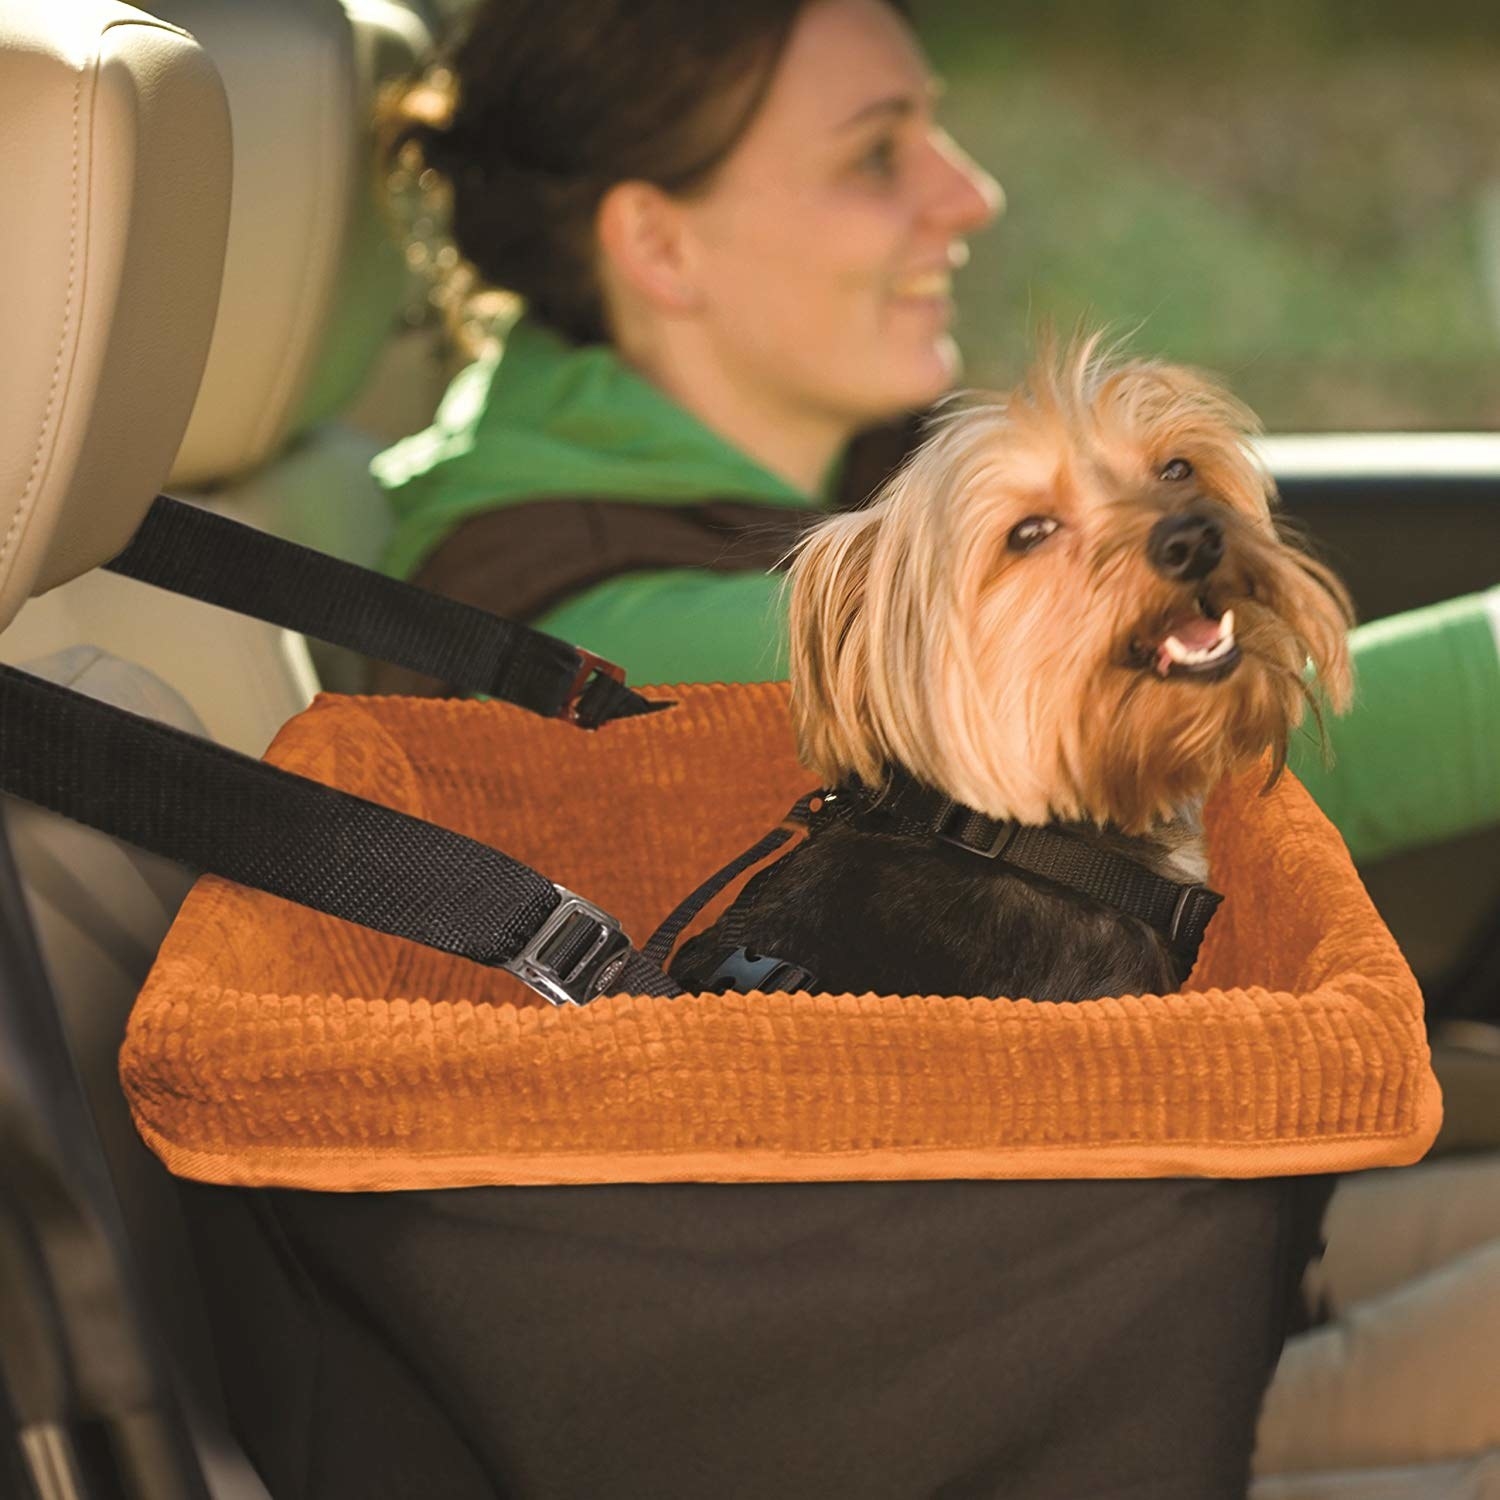 a small dog sitting in a basket-like booster seat in the car